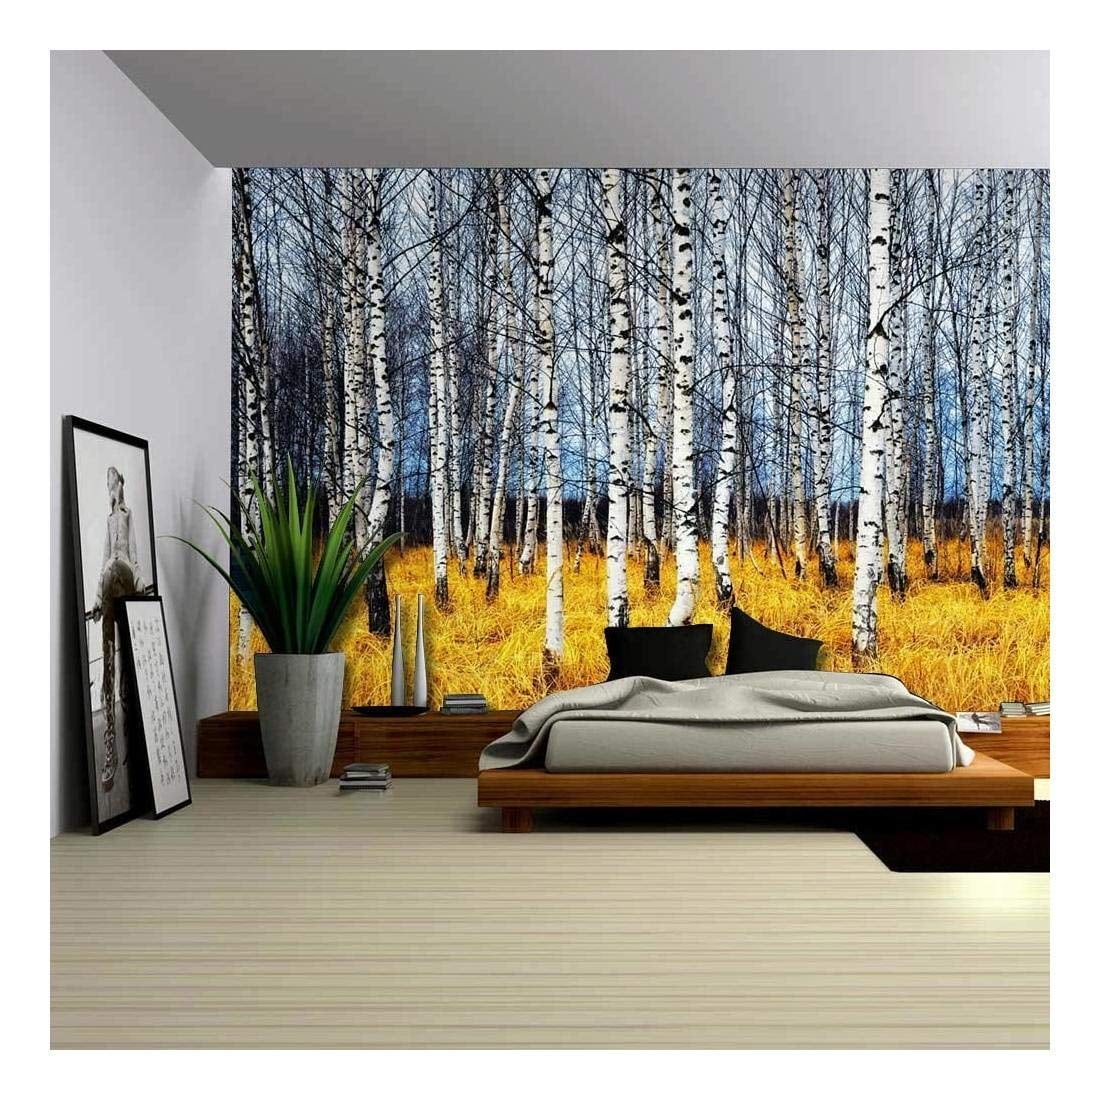 wall26 Removable Wall Sticker/Wall Mural 36x48 Birch Trees in Bright Sunshine in Late Summer Creative Window View Home Decor/Wall Decor